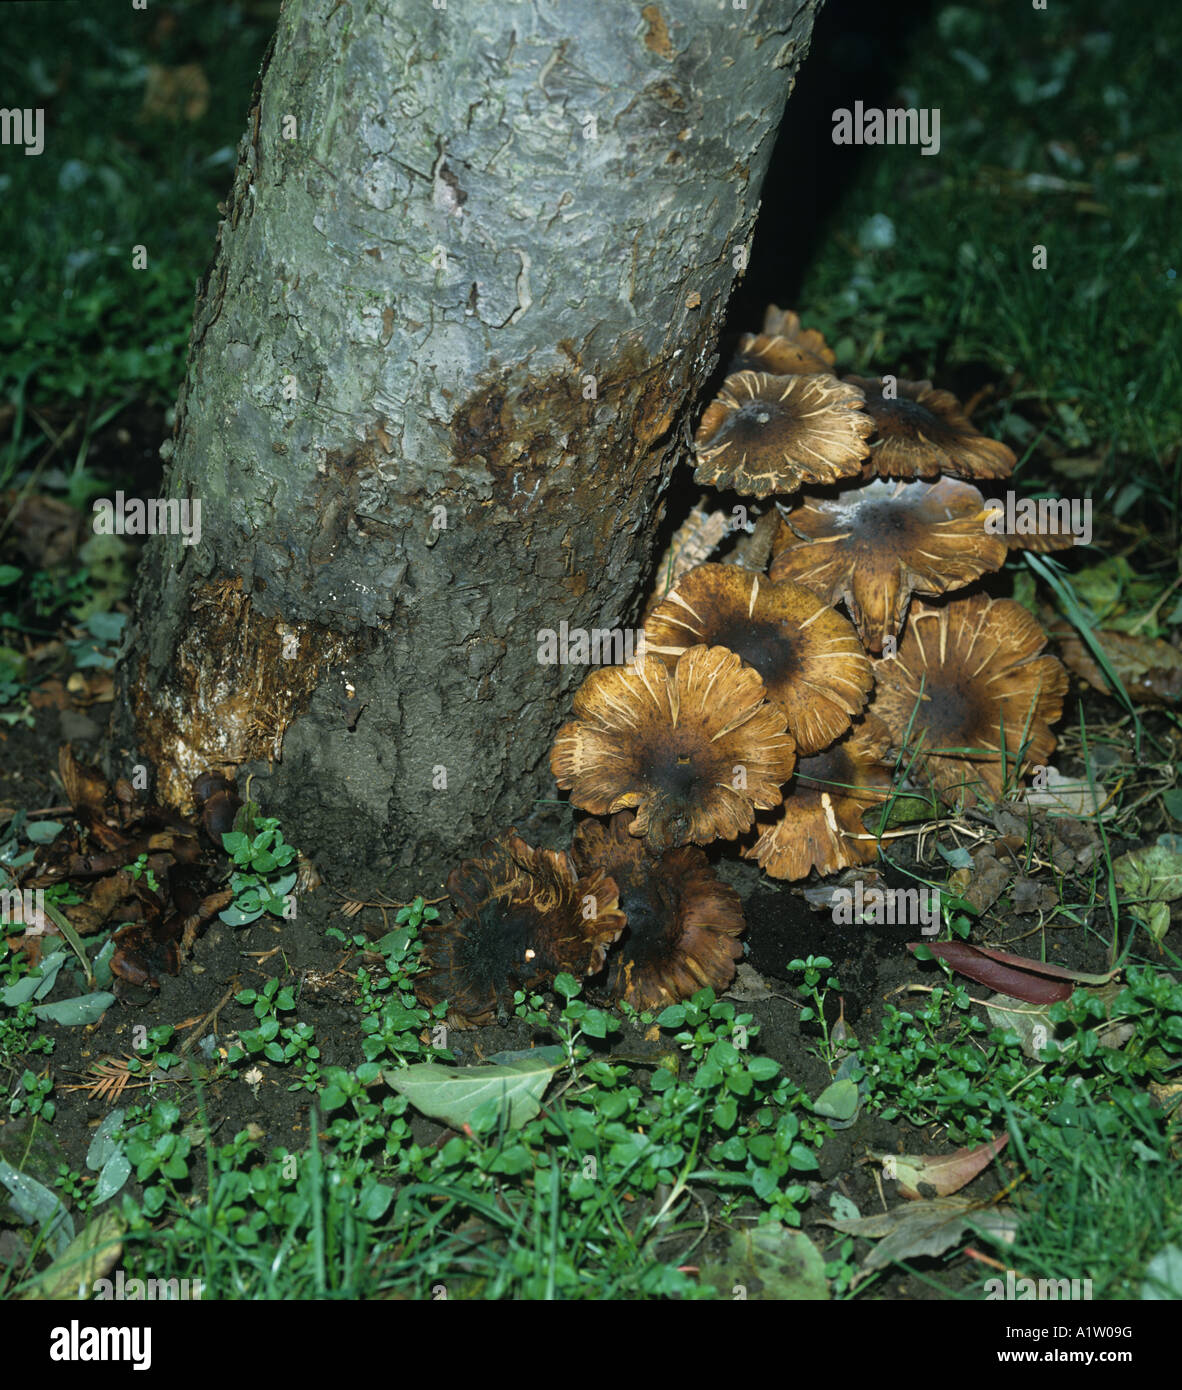 Honey fungus Armillaria mellea fruiting bodies ant the base of an infected apple tree Stock Photo